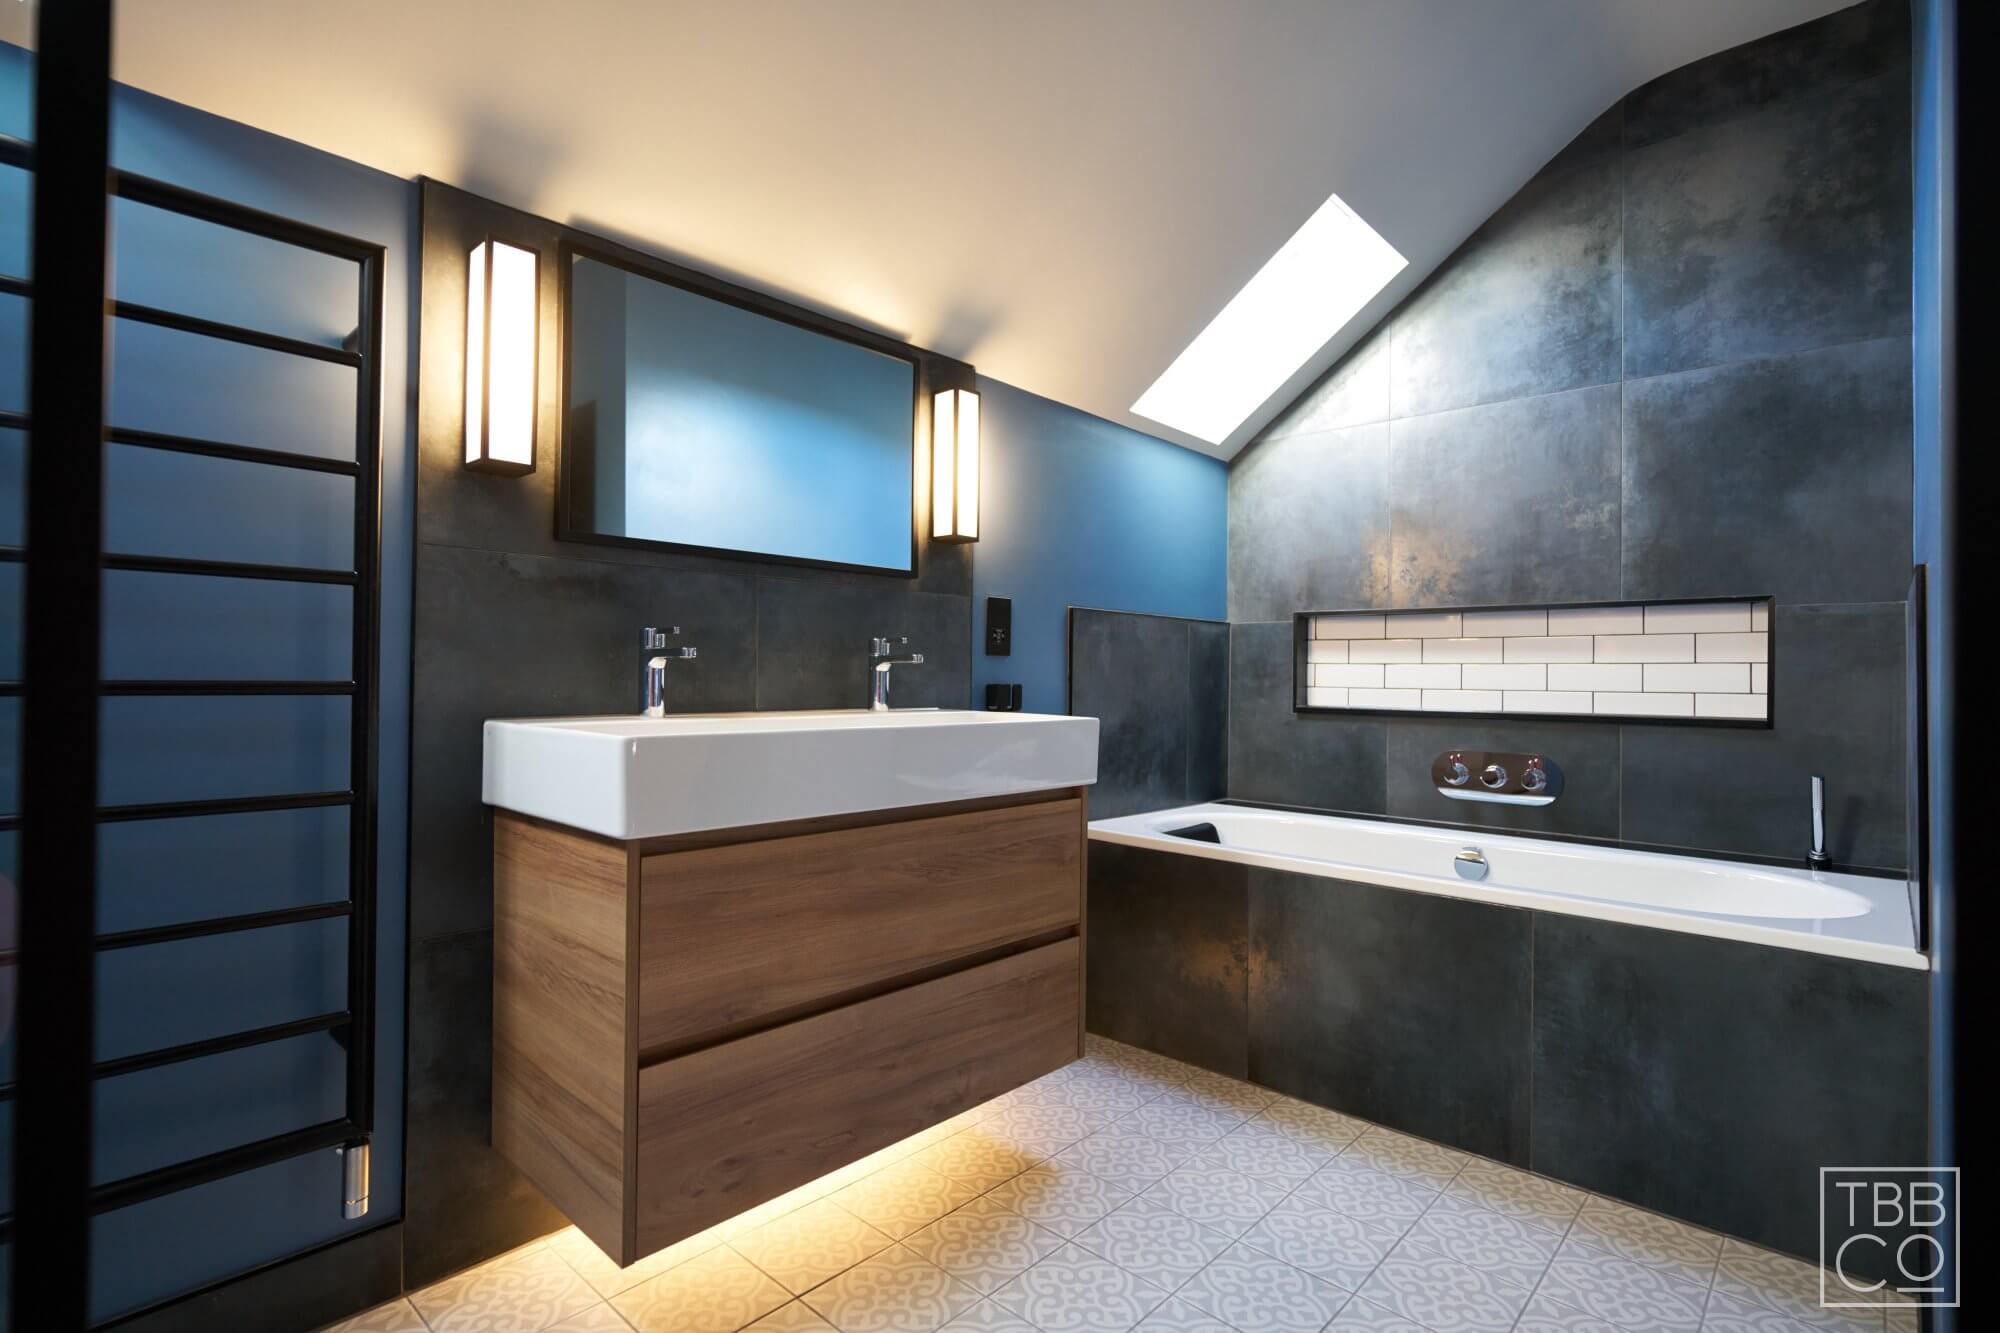 Bathroom design with dark tiles and black taps and shower enclosure